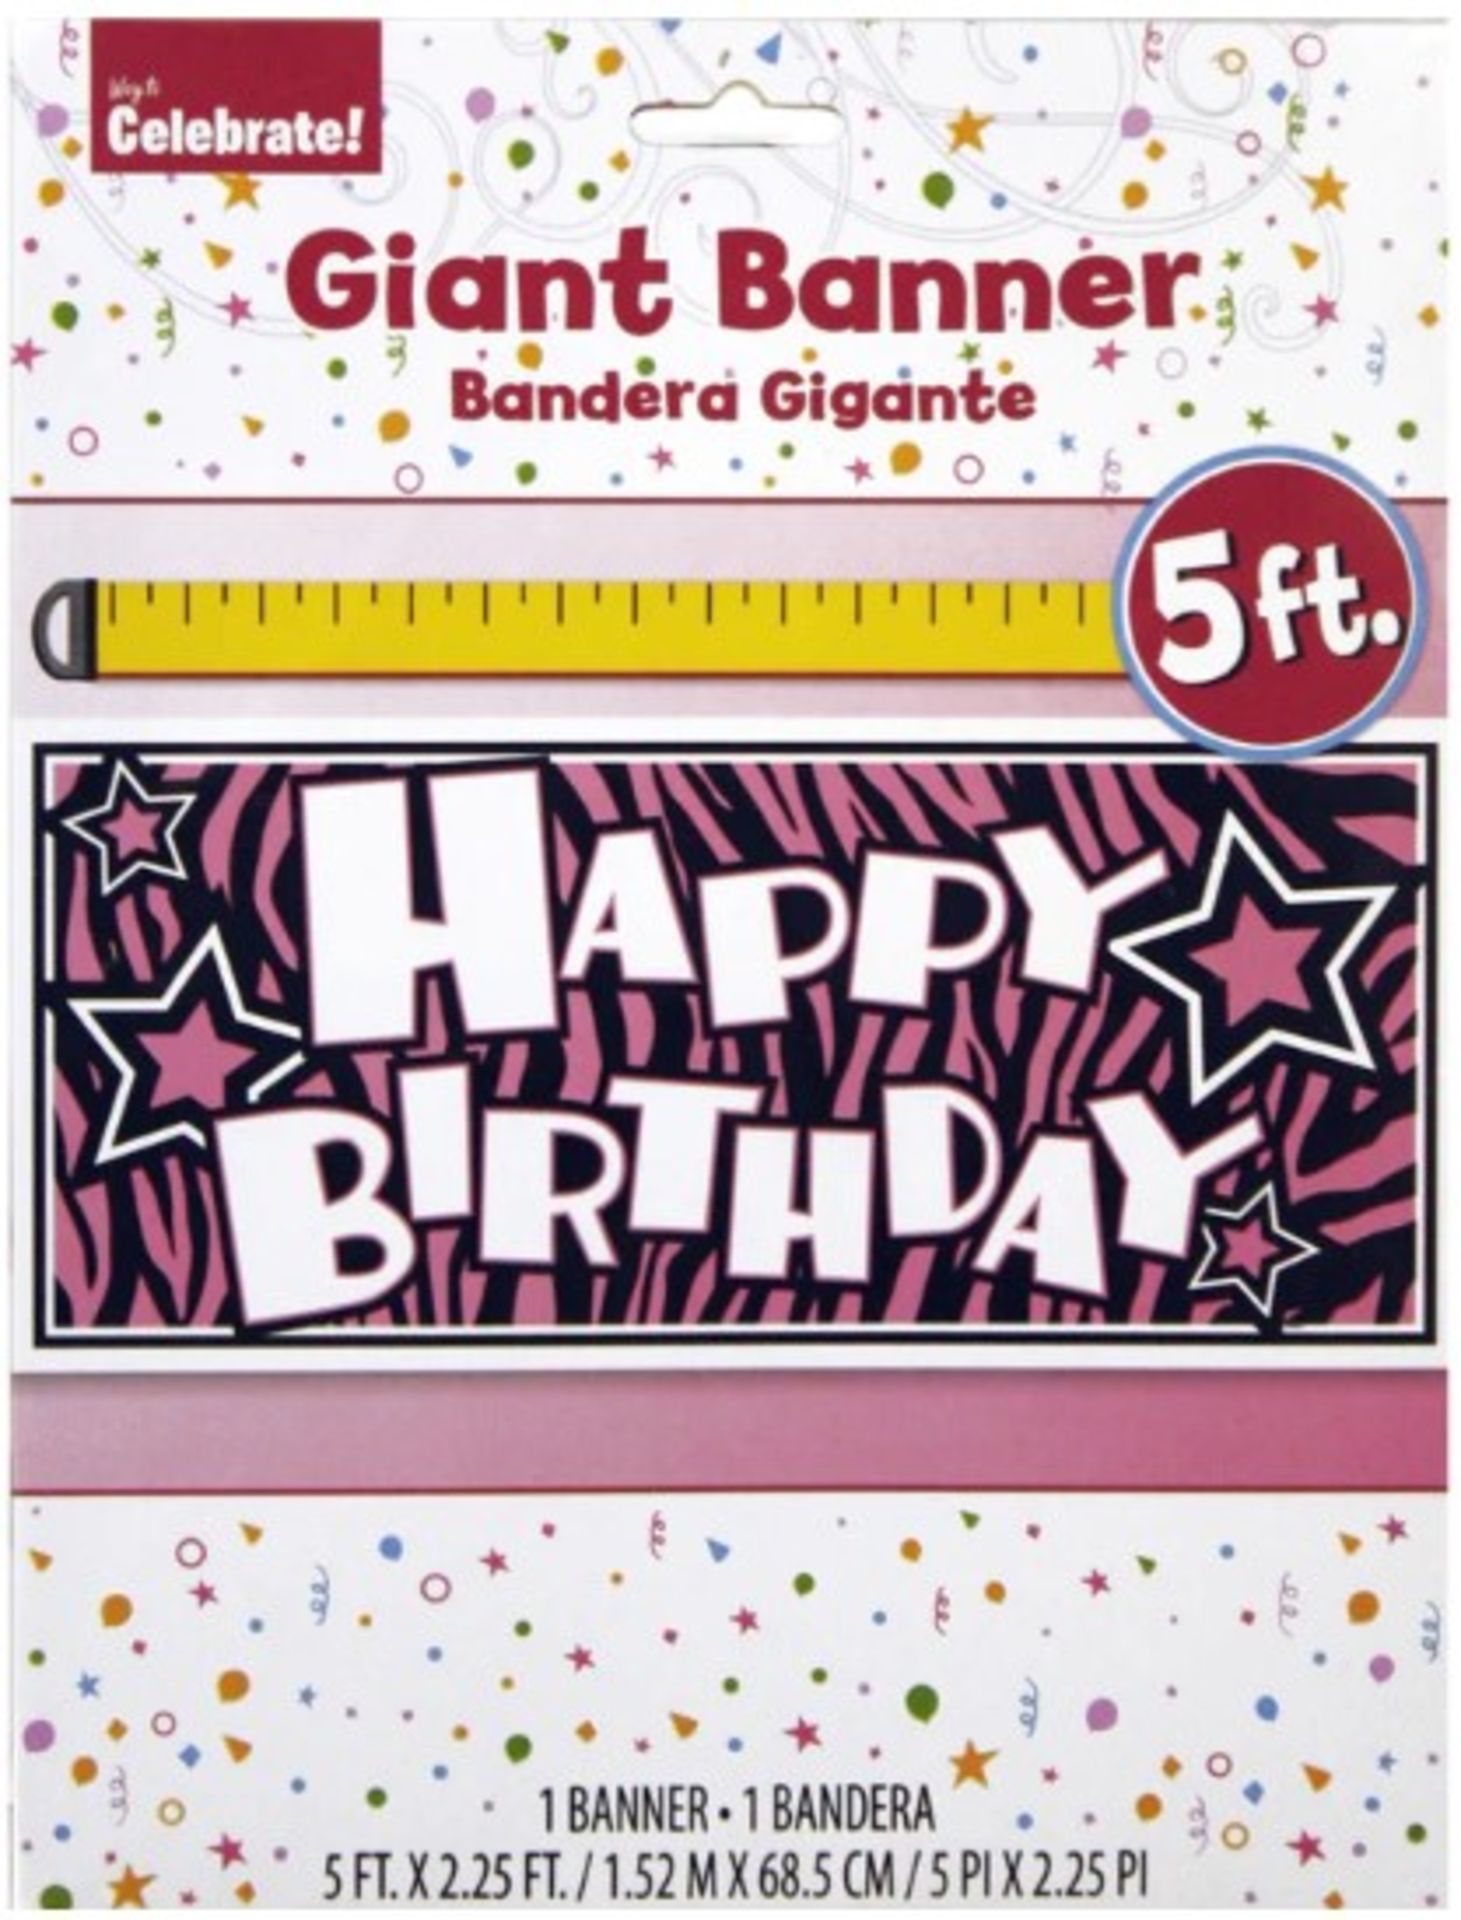 1000 COLOURFUL BIRTHDAY BANNERS FOR PARTIES - RANGE OF DESIGNS, RRP £10,000 - Image 4 of 5